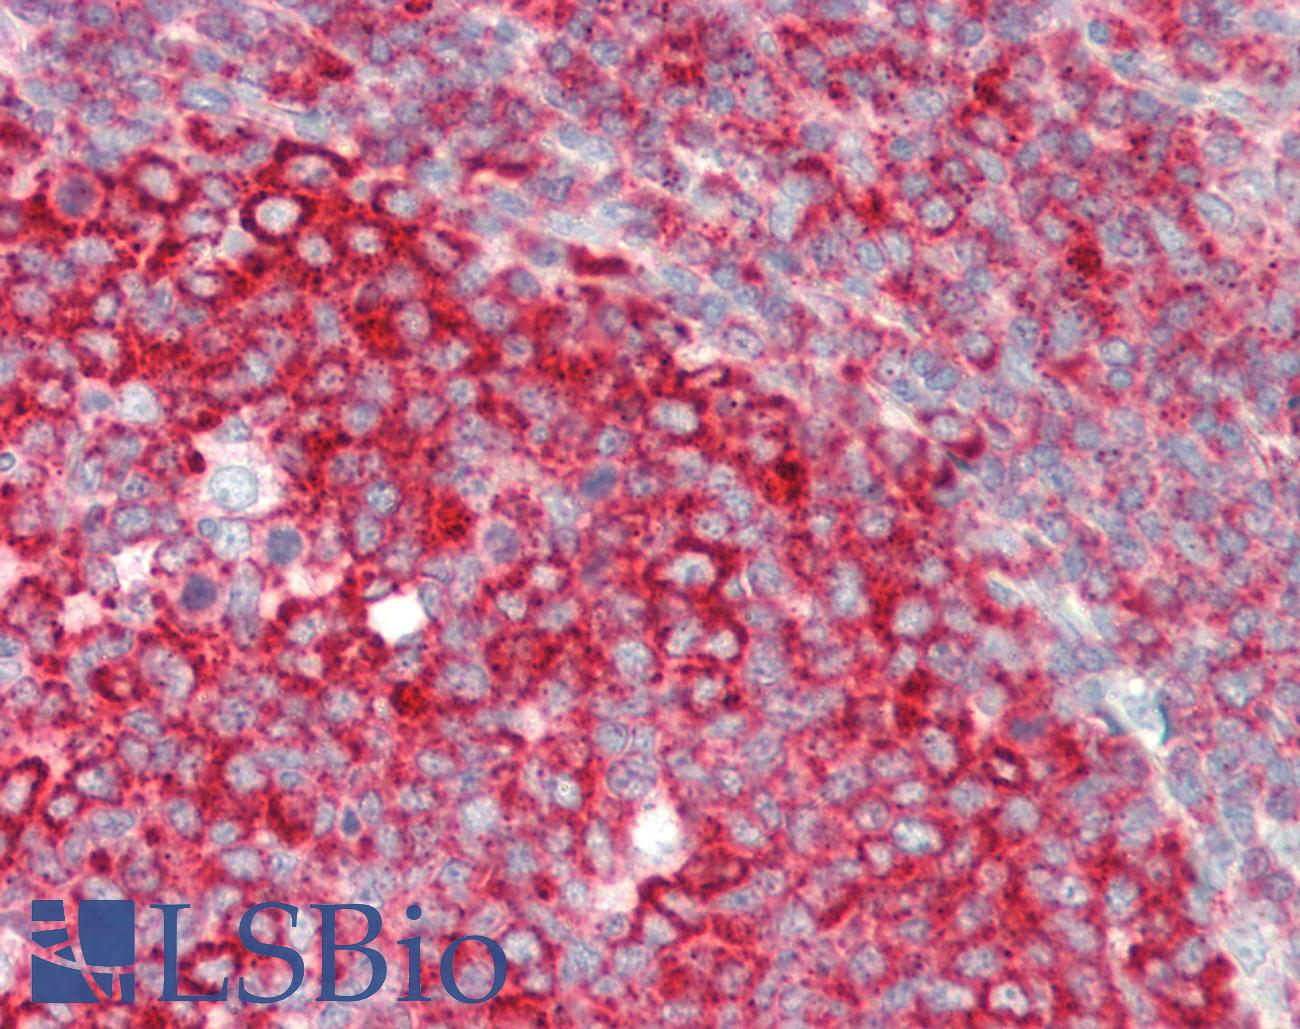 RPL7A / Ribosomal Protein L7a Antibody - Human Tonsil: Formalin-Fixed, Paraffin-Embedded (FFPE)